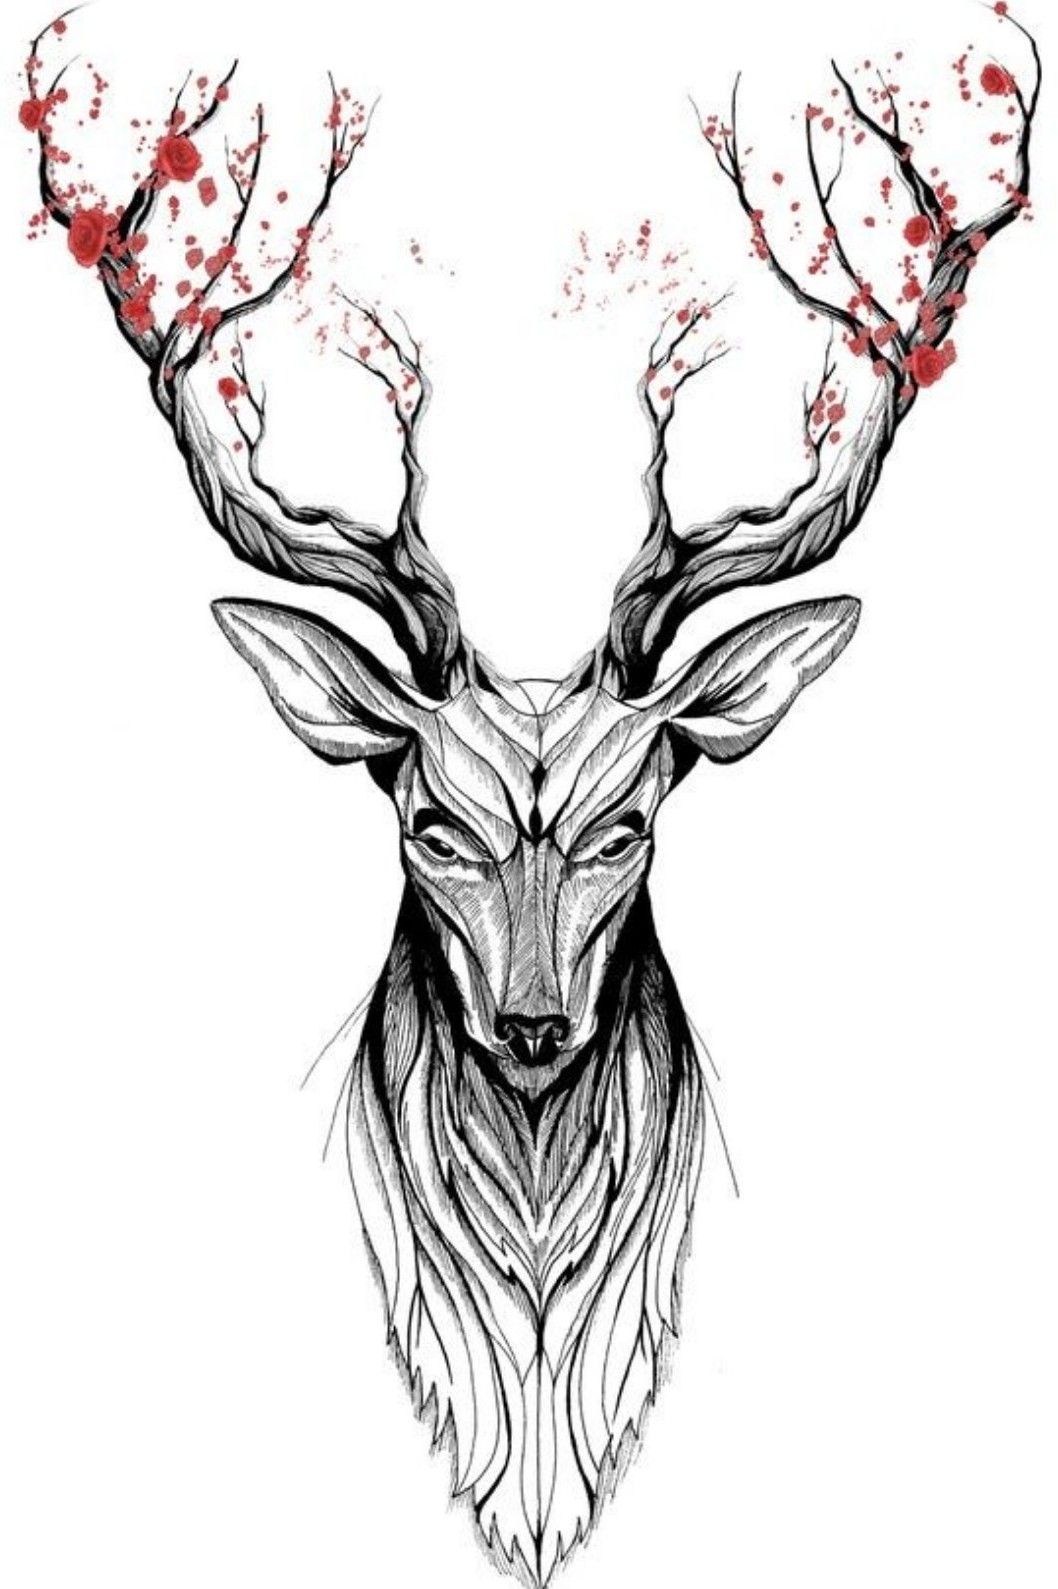 250 Pictures Of Deer Tattoos Pictures Stock Photos Pictures   RoyaltyFree Images  iStock